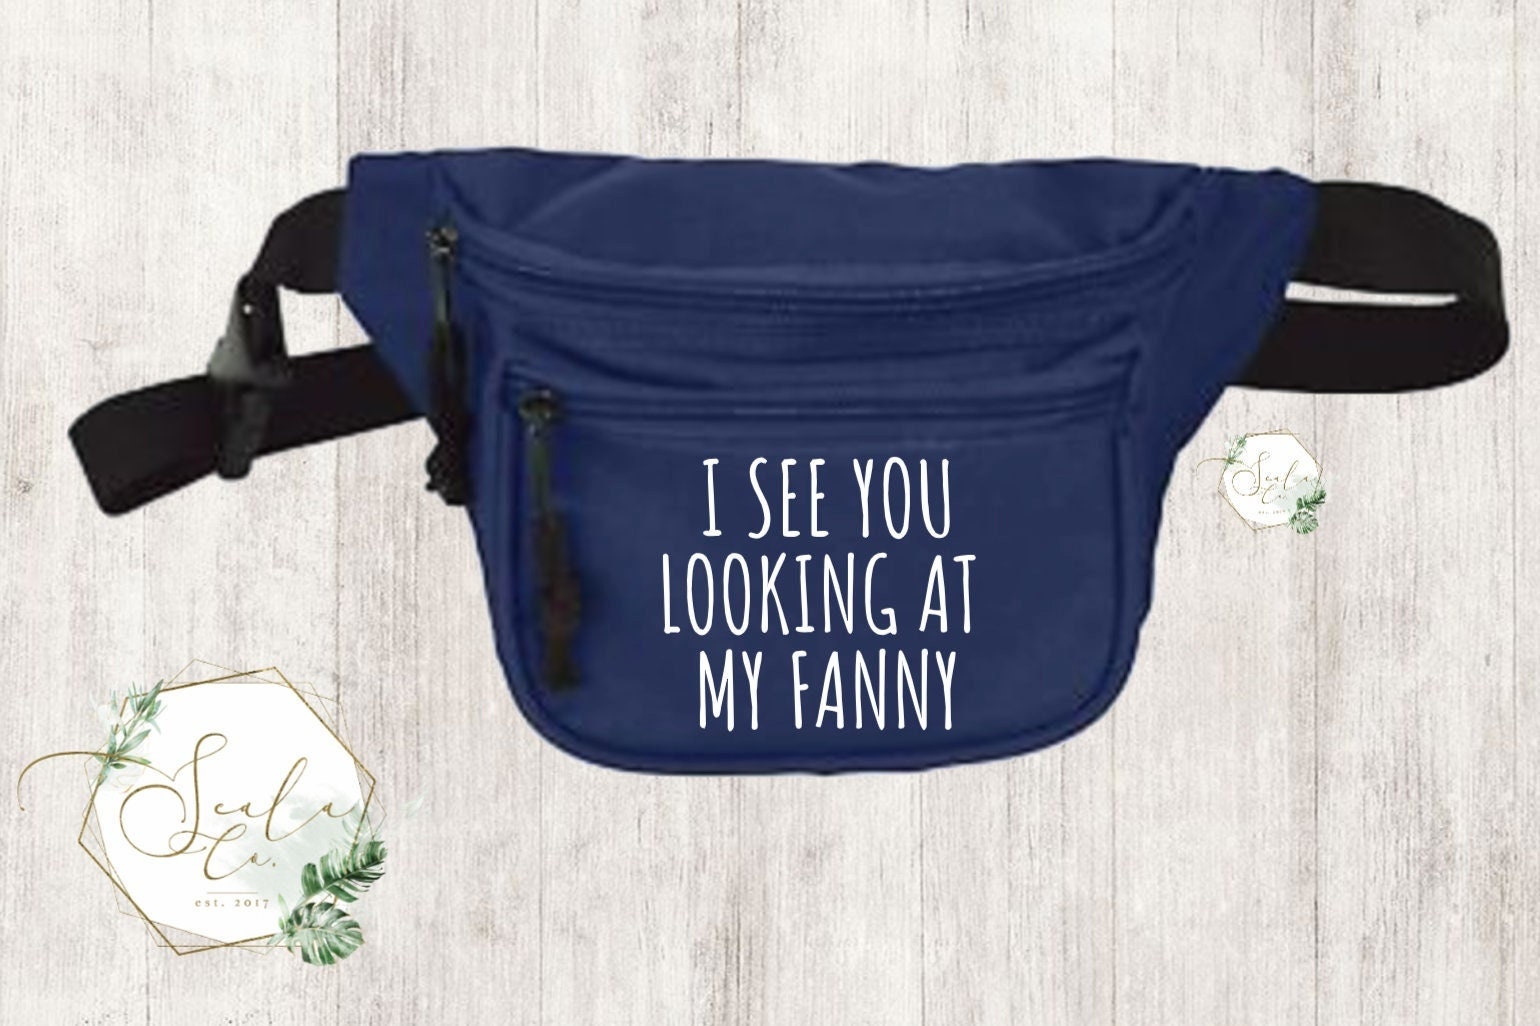 Opdage lever Skru ned Buy Custom Fanny Packs Sassy Sarcastic Funny Waist Bags Cool Online in  India - Etsy